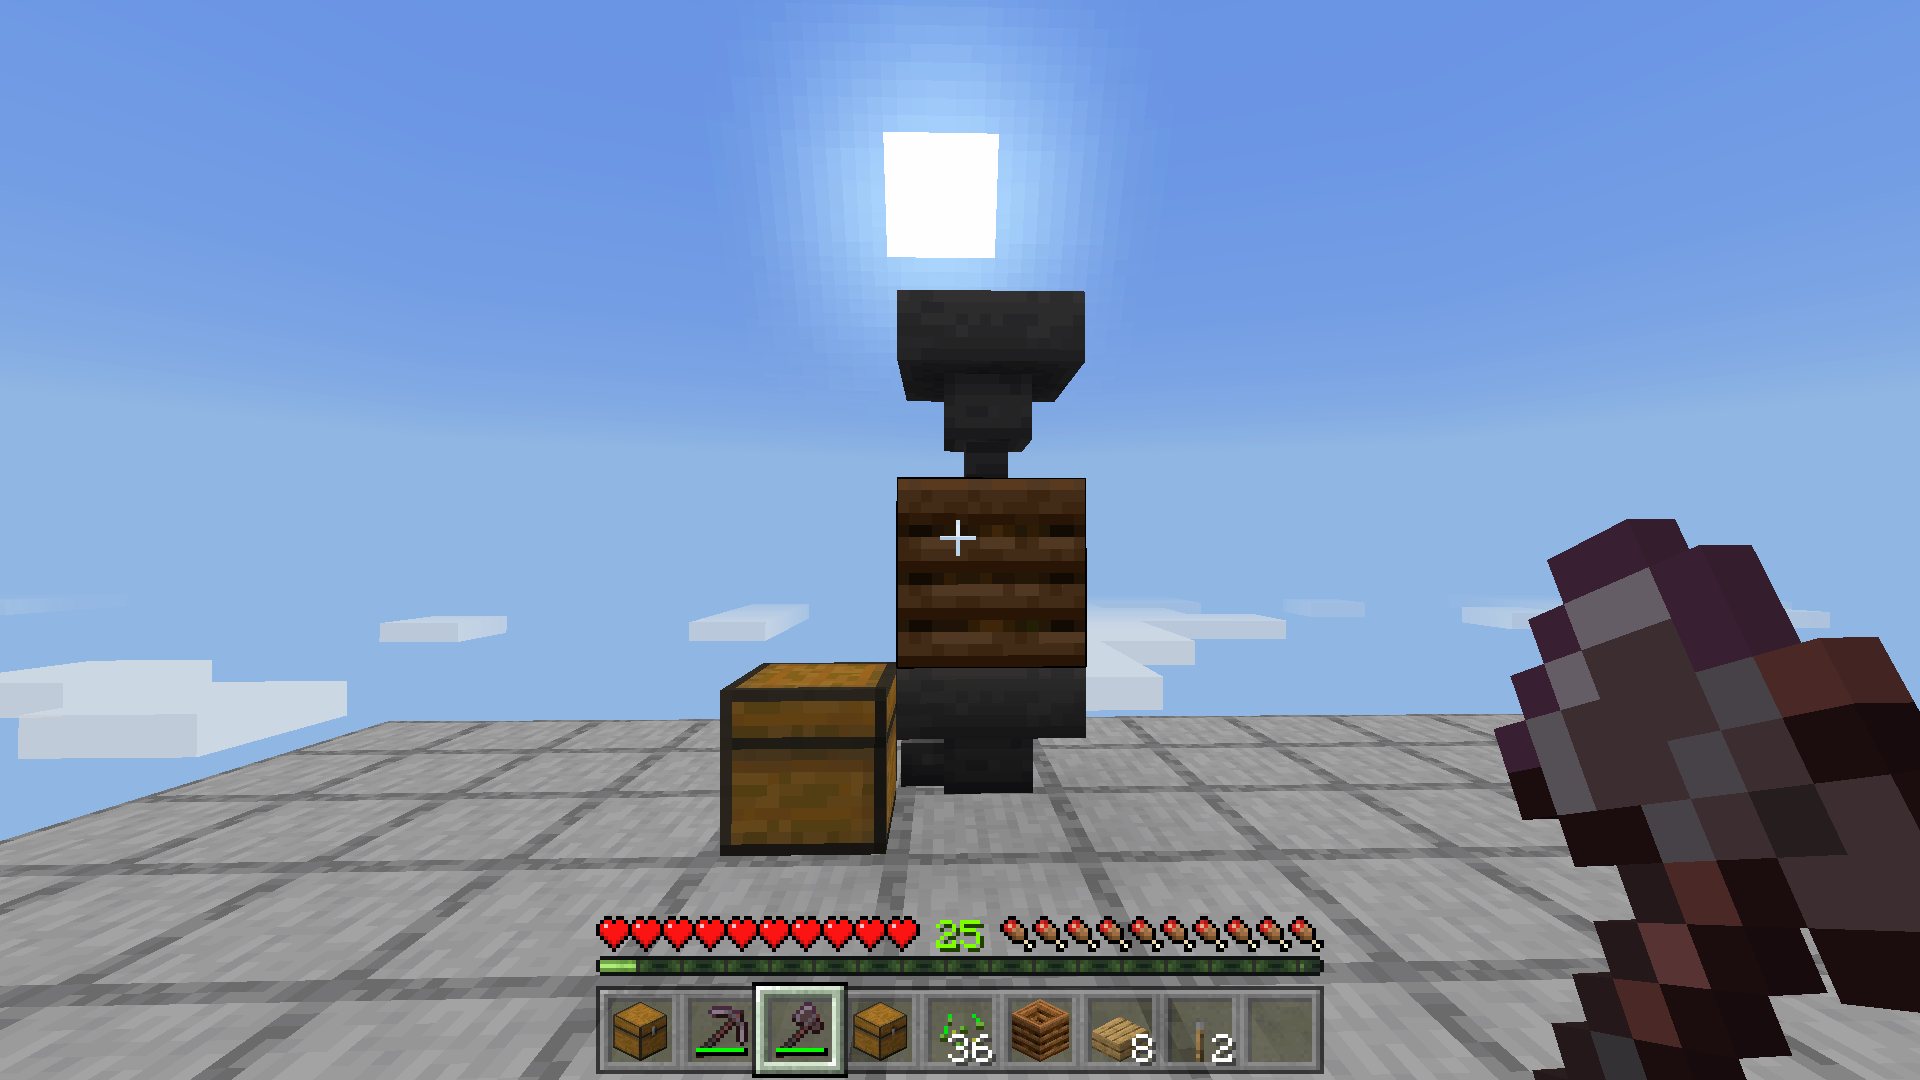 How To Make A Composter In Minecraft